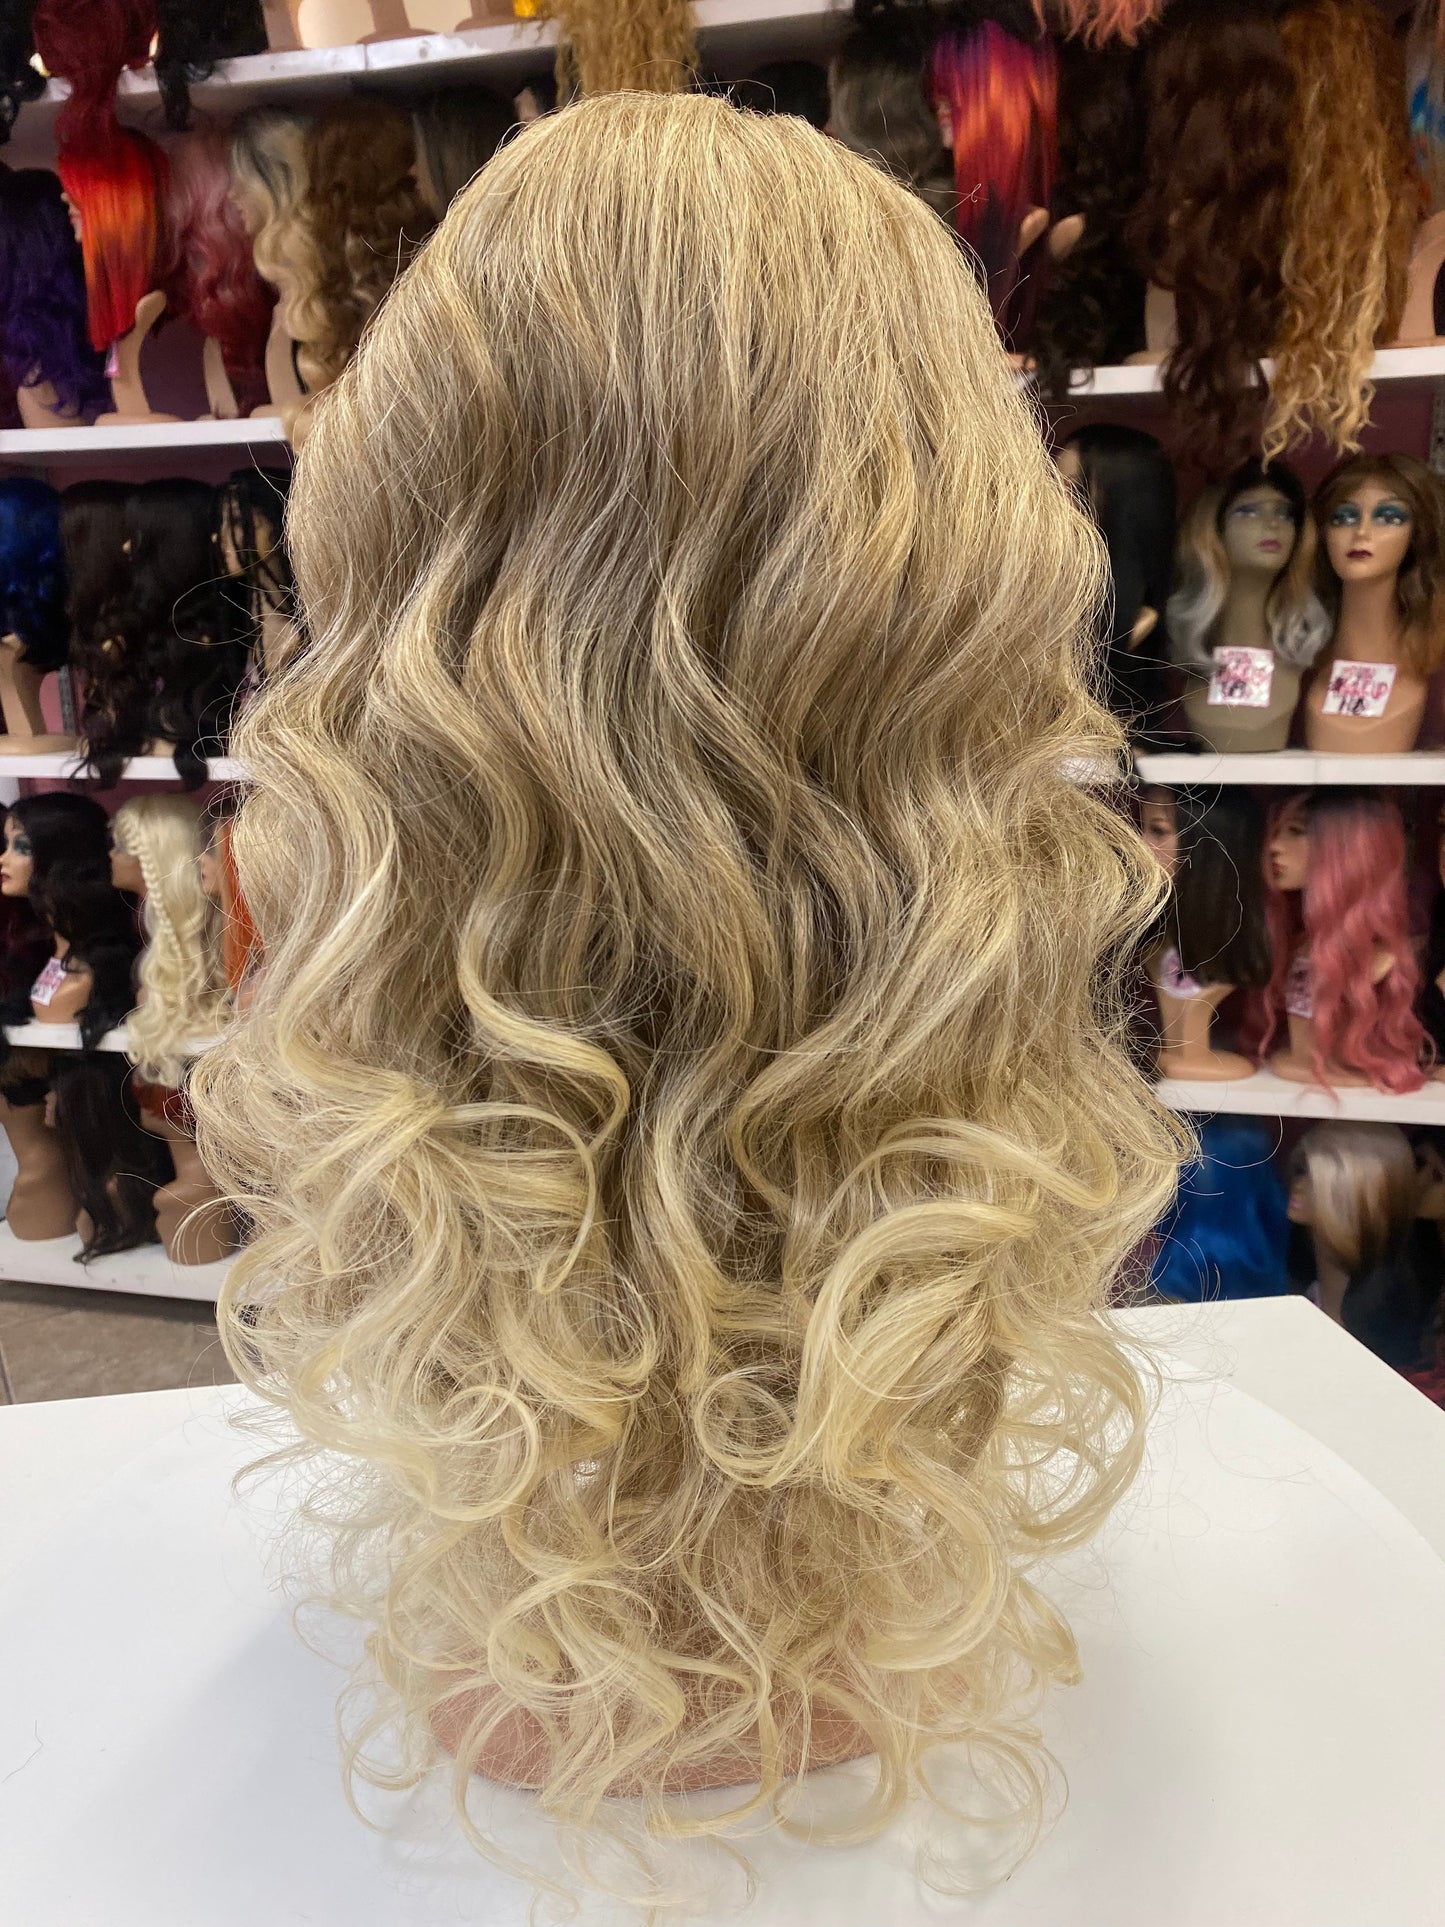 503 Sophia - Right Part Lace Front Wig - 10/613 - DaizyKat Cosmetics 503 Sophia - Right Part Lace Front Wig - 10/613 DaizyKat Cosmetics Wigs